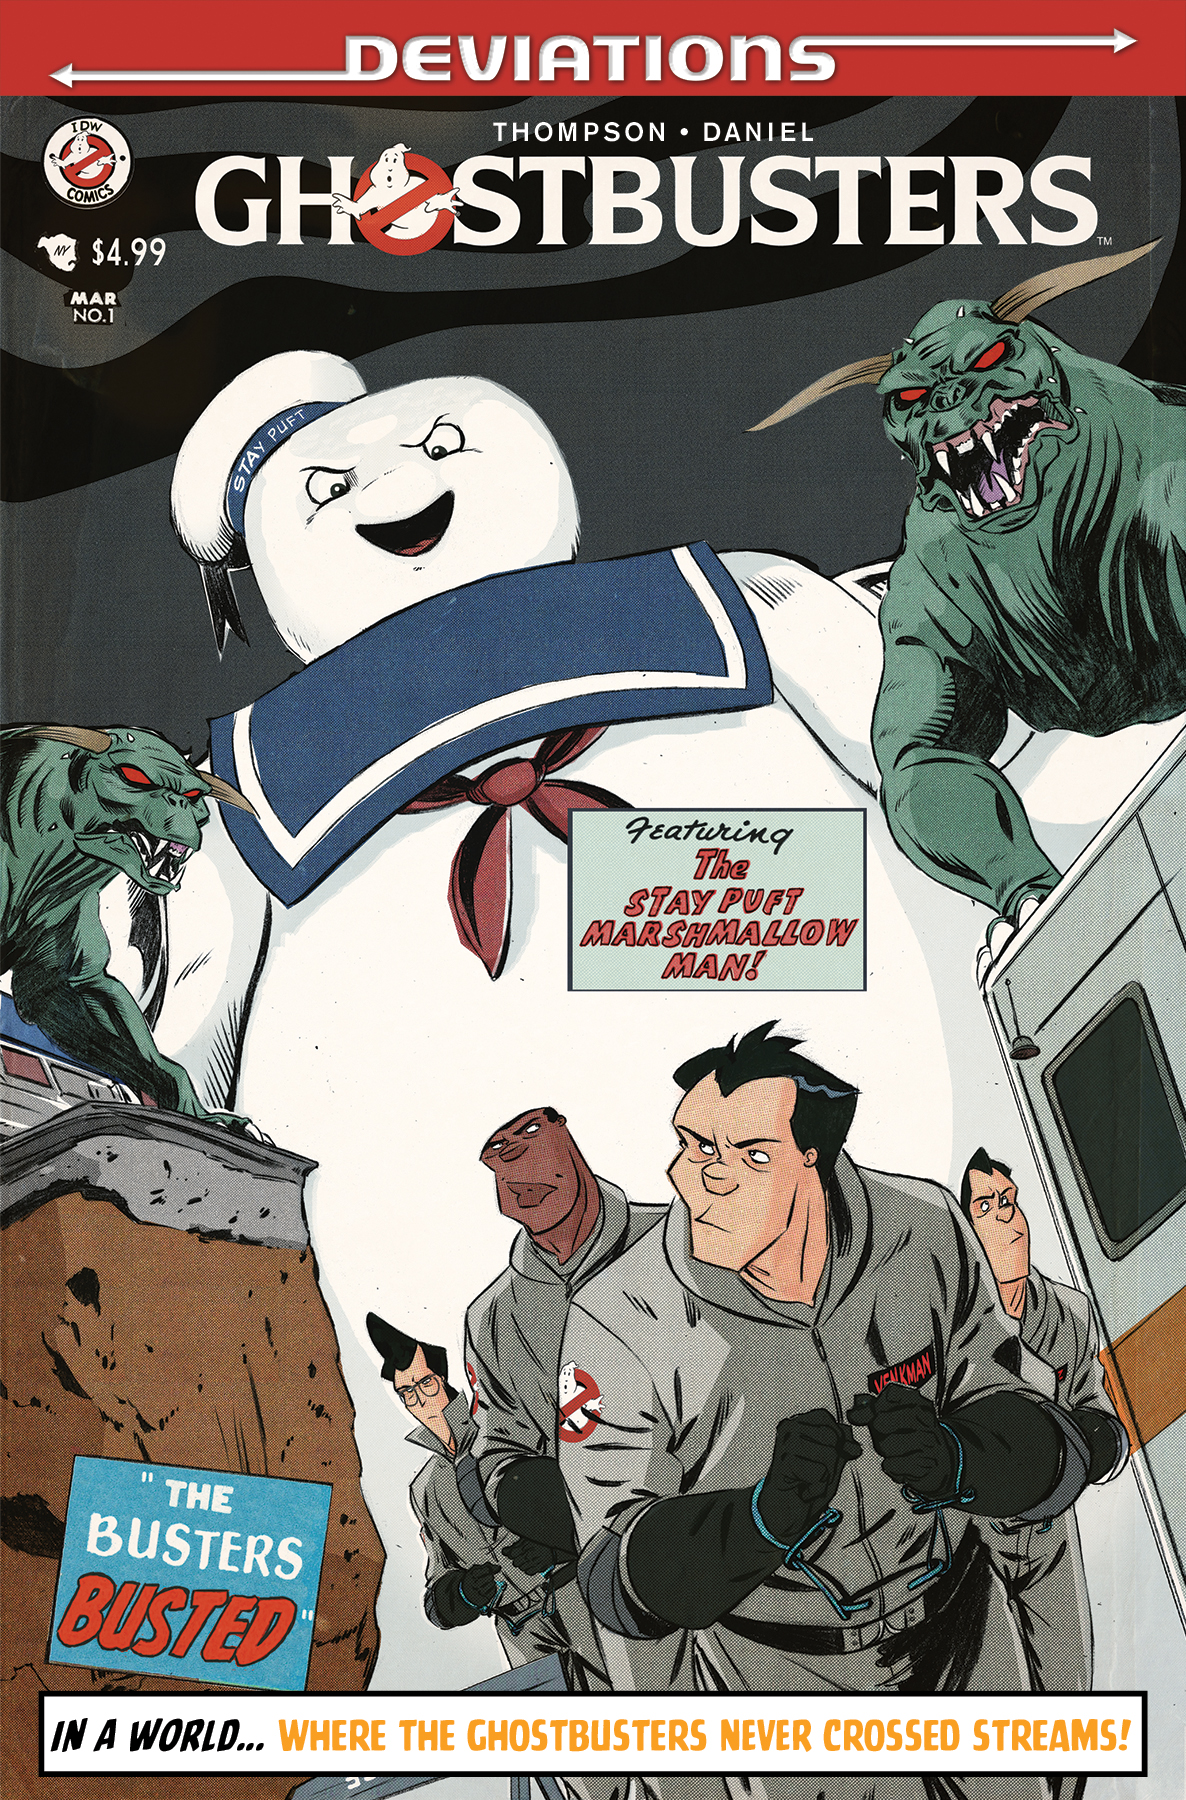 Ghostbusters Deviation Cover